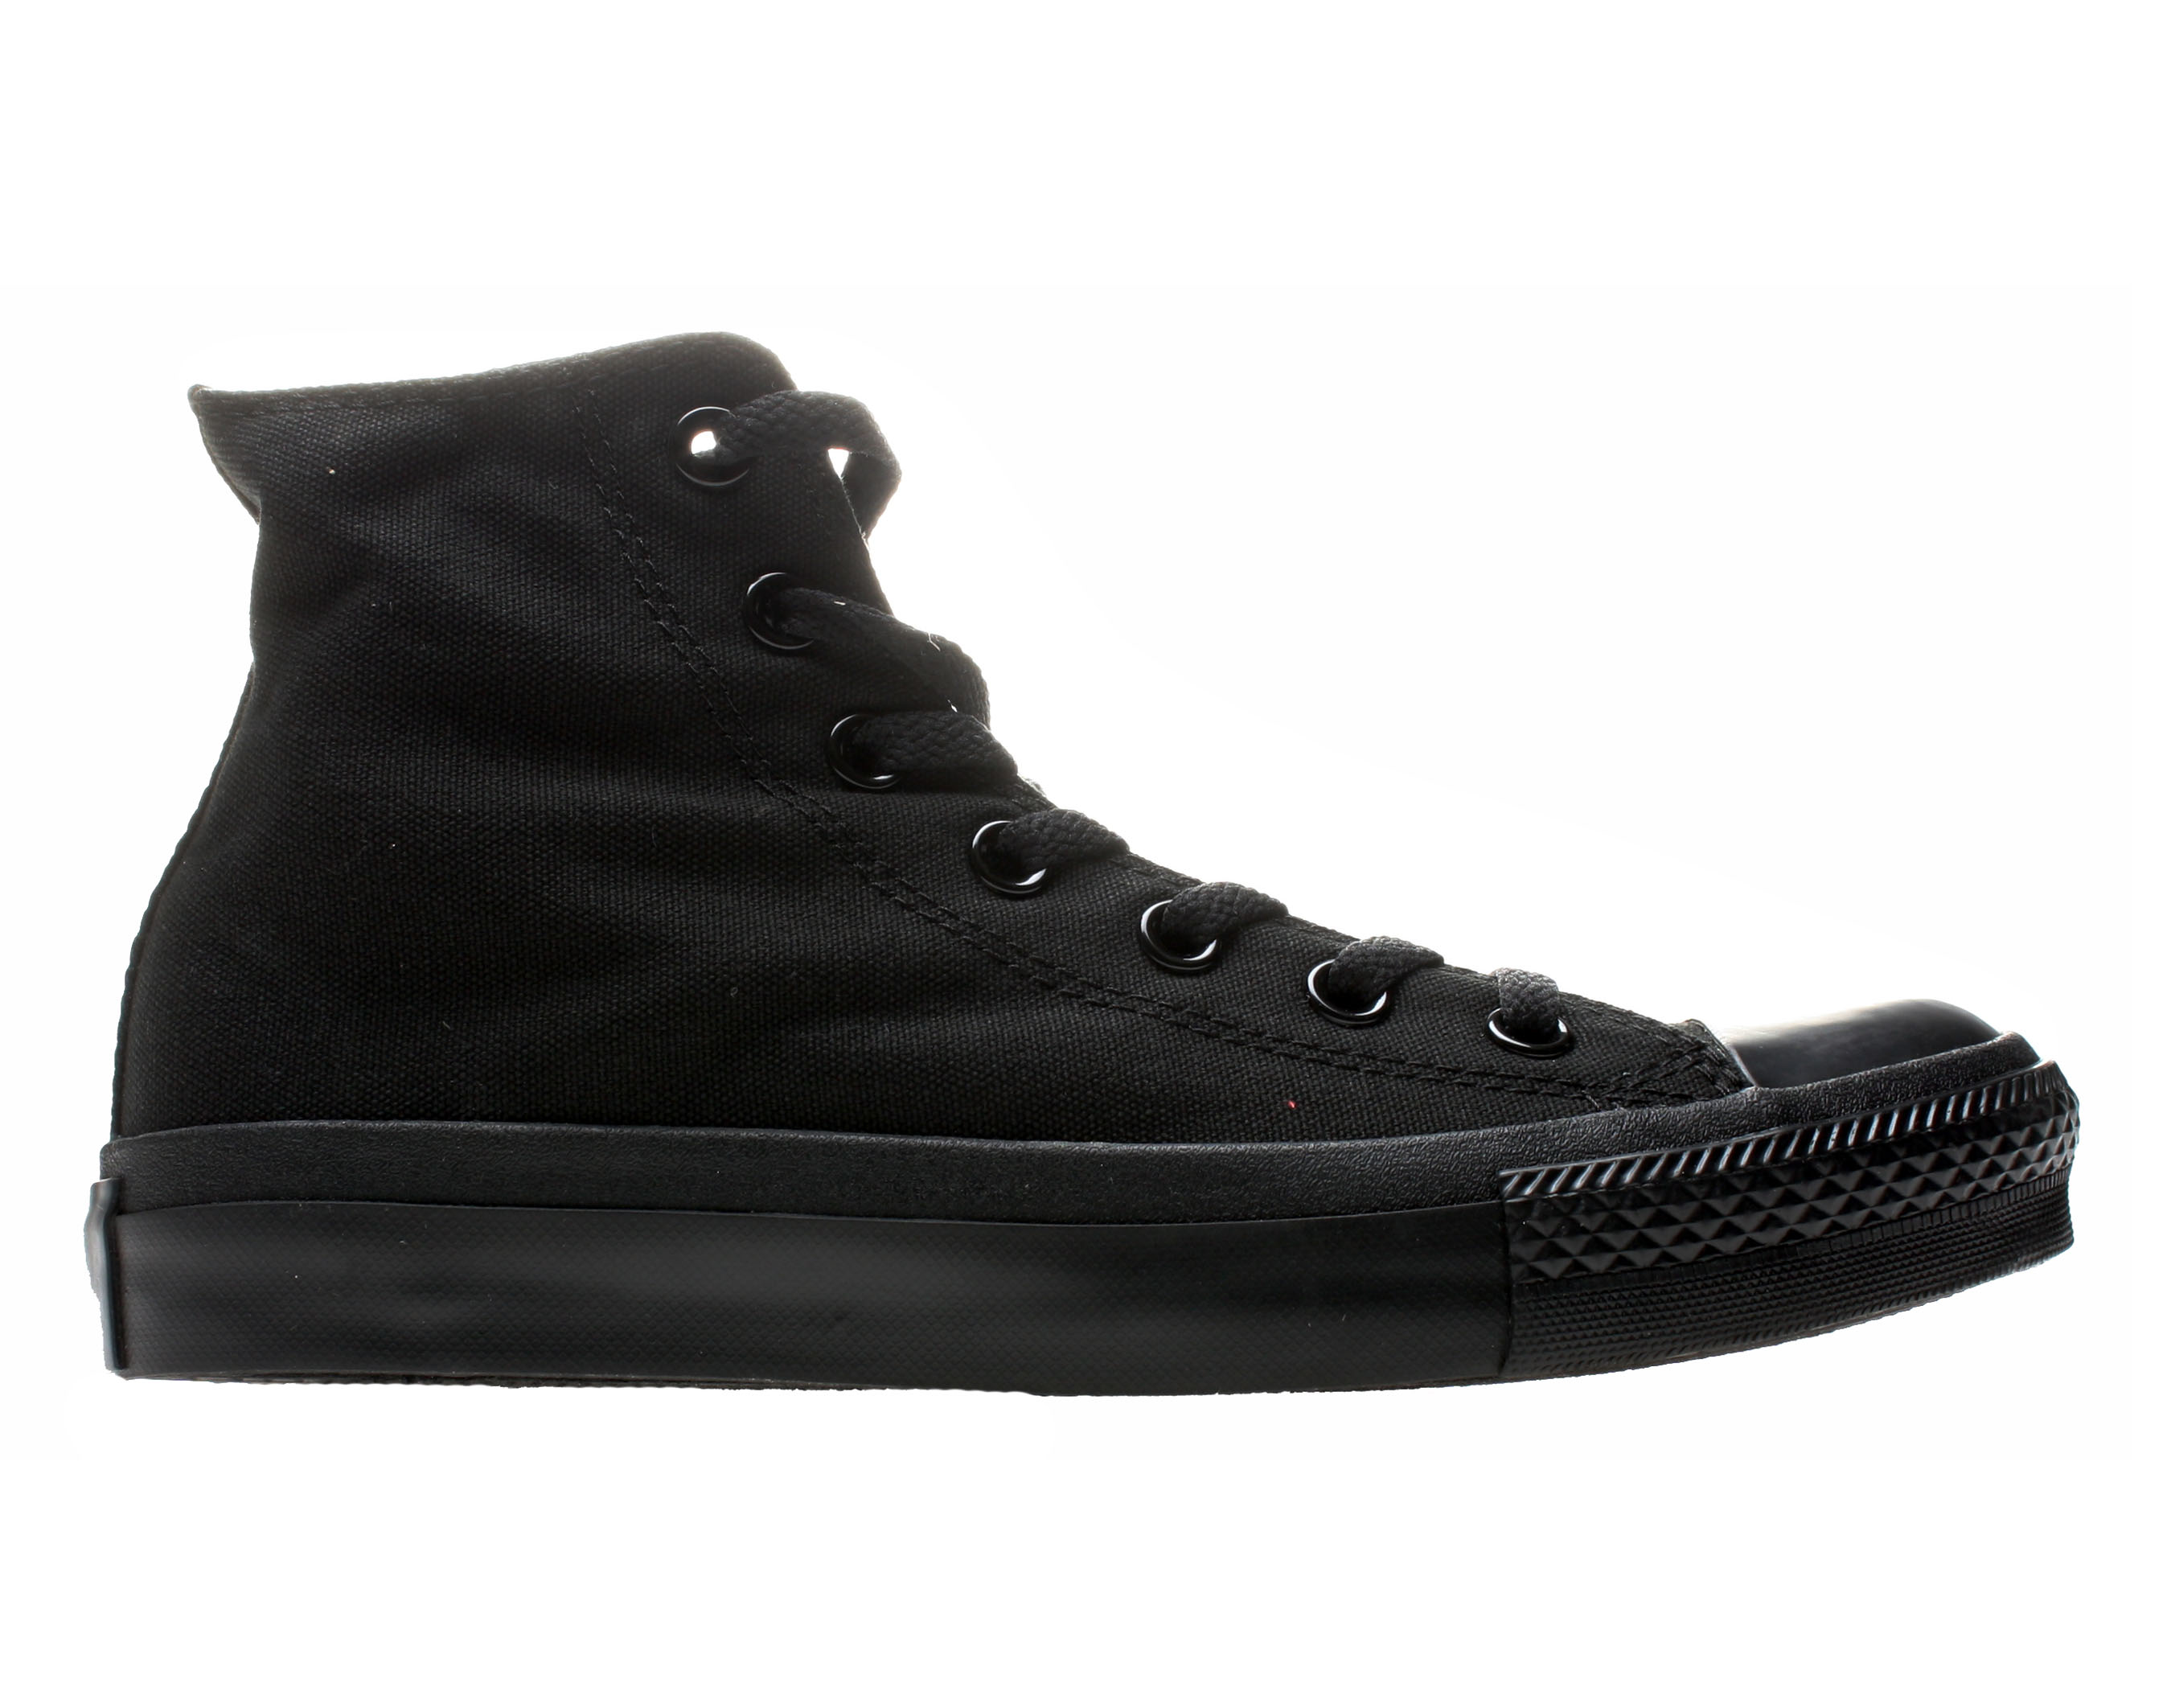 Converse Chuck Taylor All Star Canvas High Top Sneaker - image 2 of 6